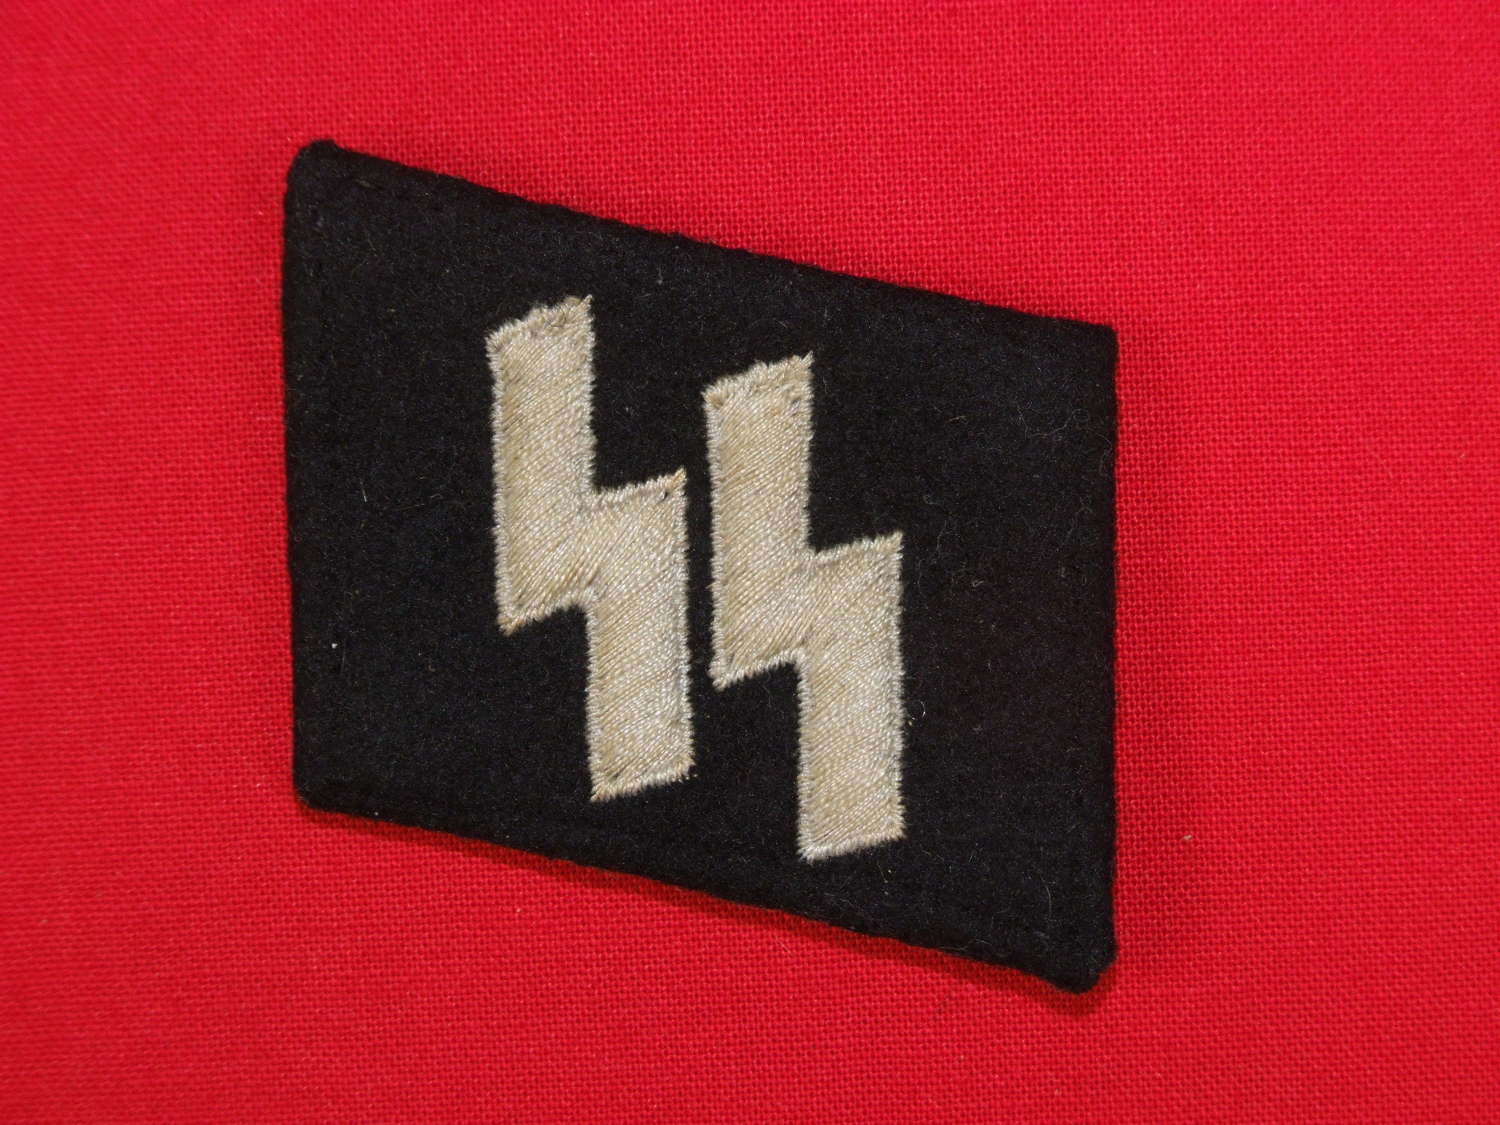 Single SS Enlisted Man's Collar Tab